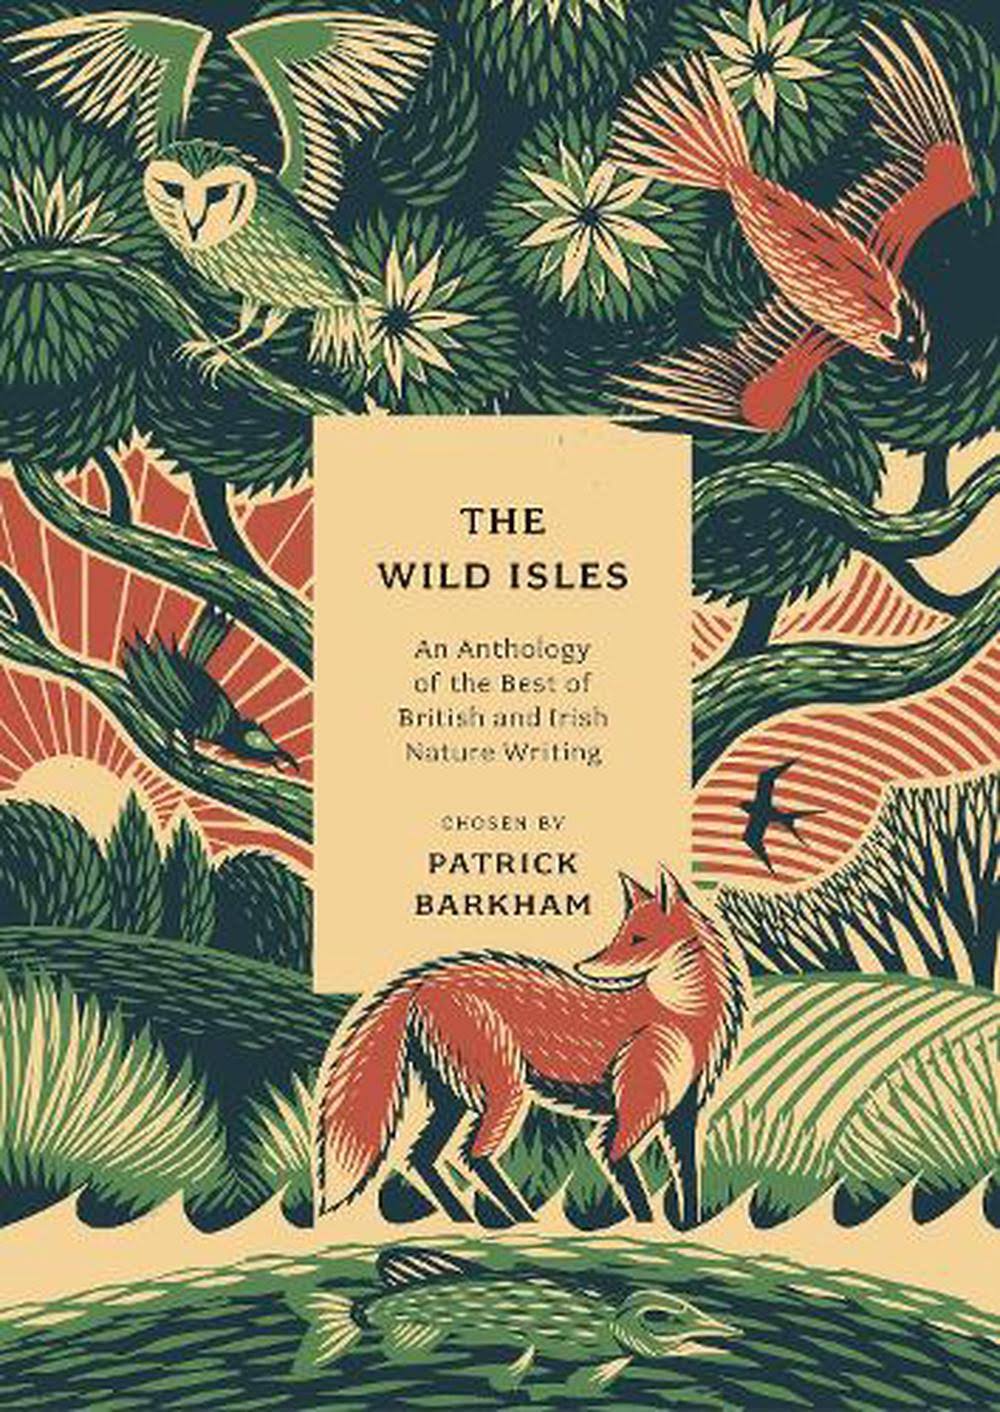 The Wild Isles: An Anthology of the Best of British and Irish Nature Writing [Book]